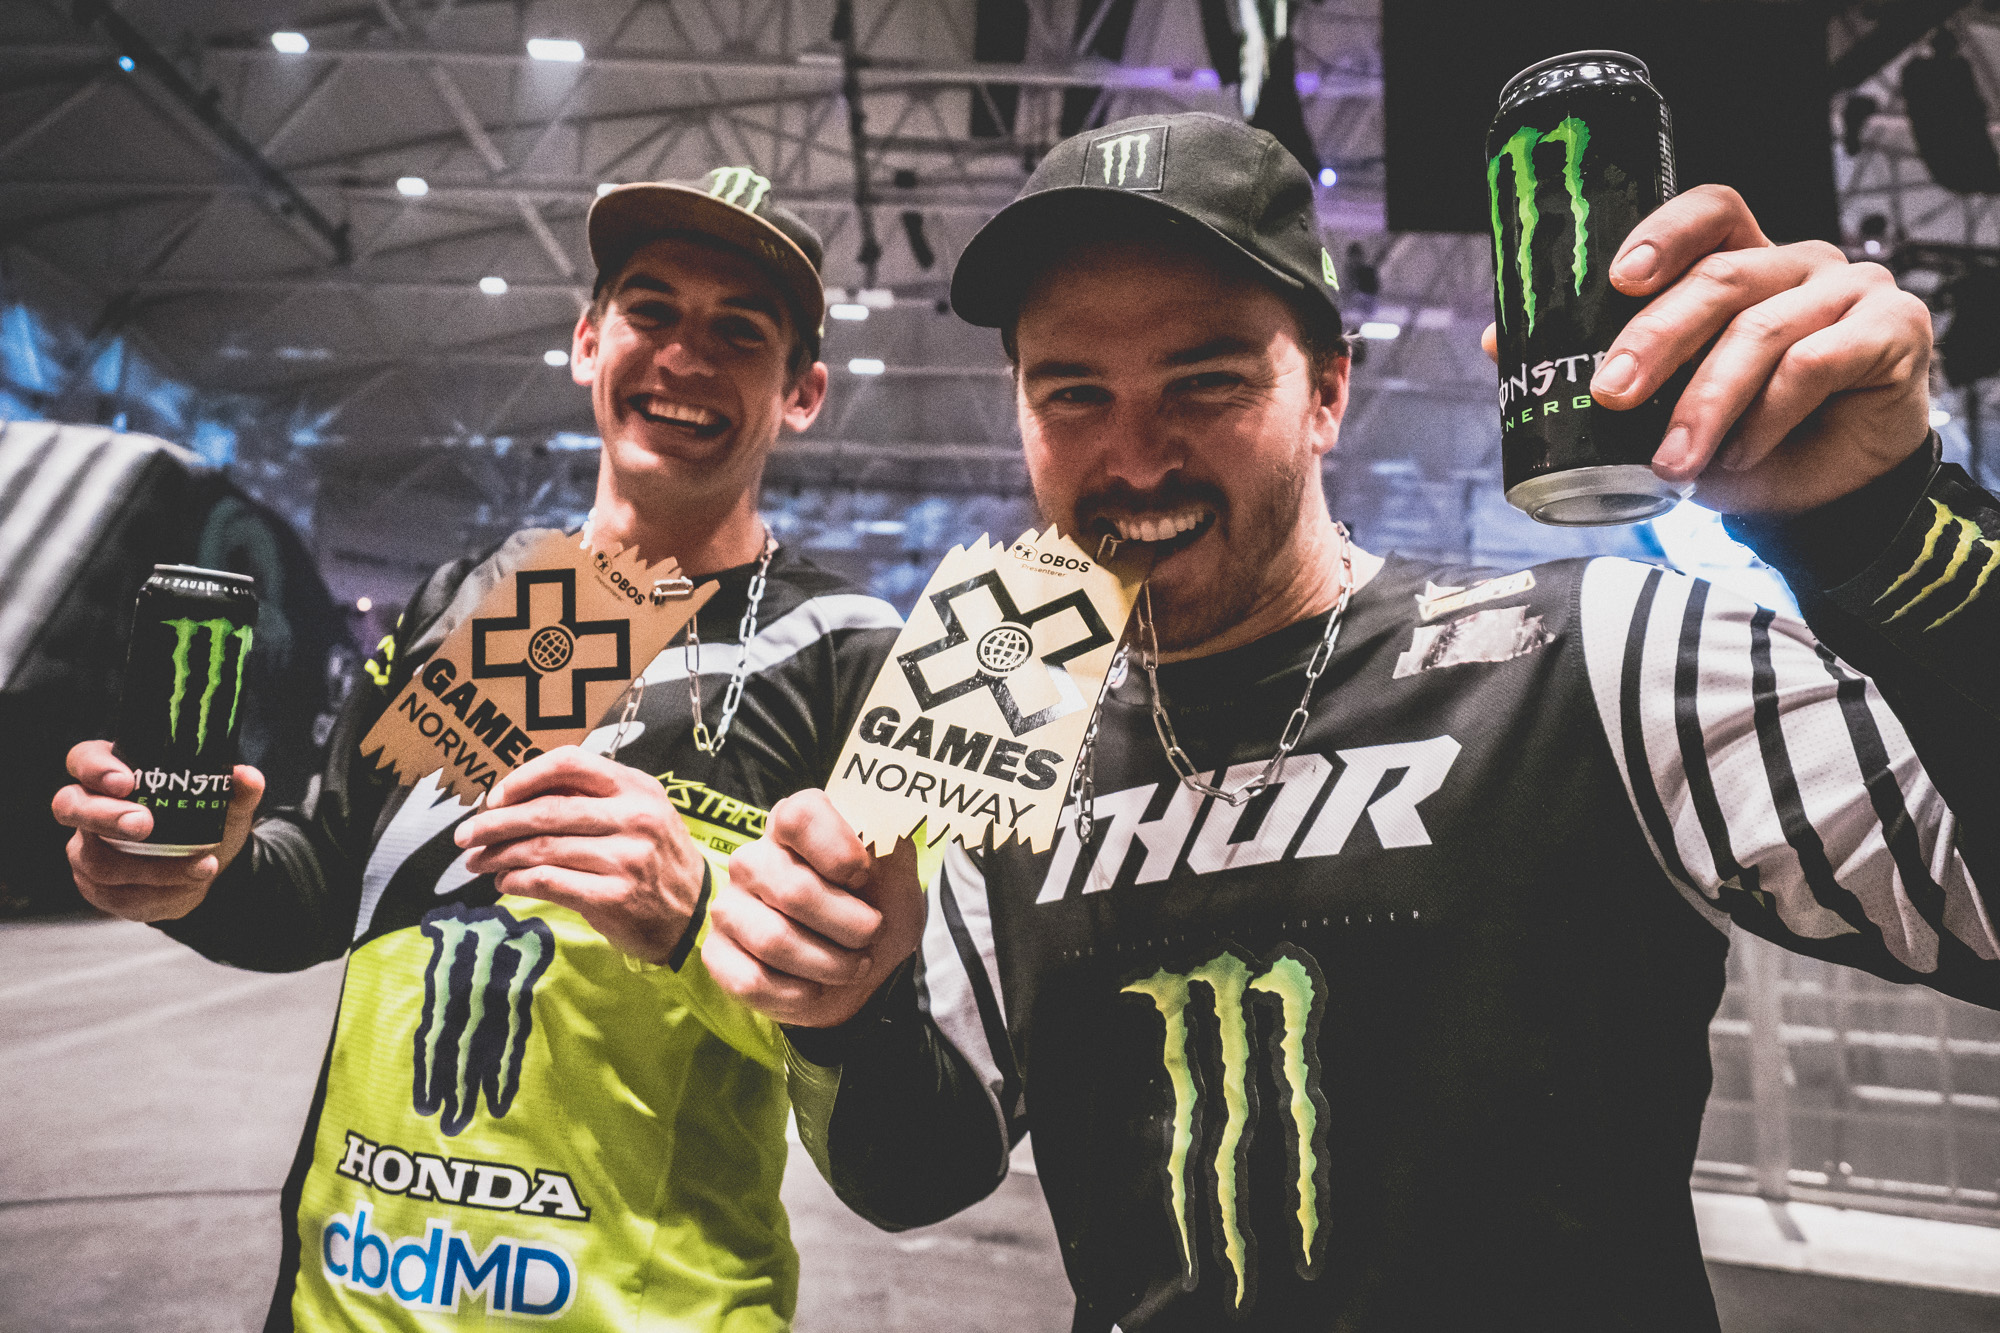 Monster Energy's Jackson Strong and Josh Sheehan Take Gold and Bronze in Moto X Best Trick at X Games Norway 2019